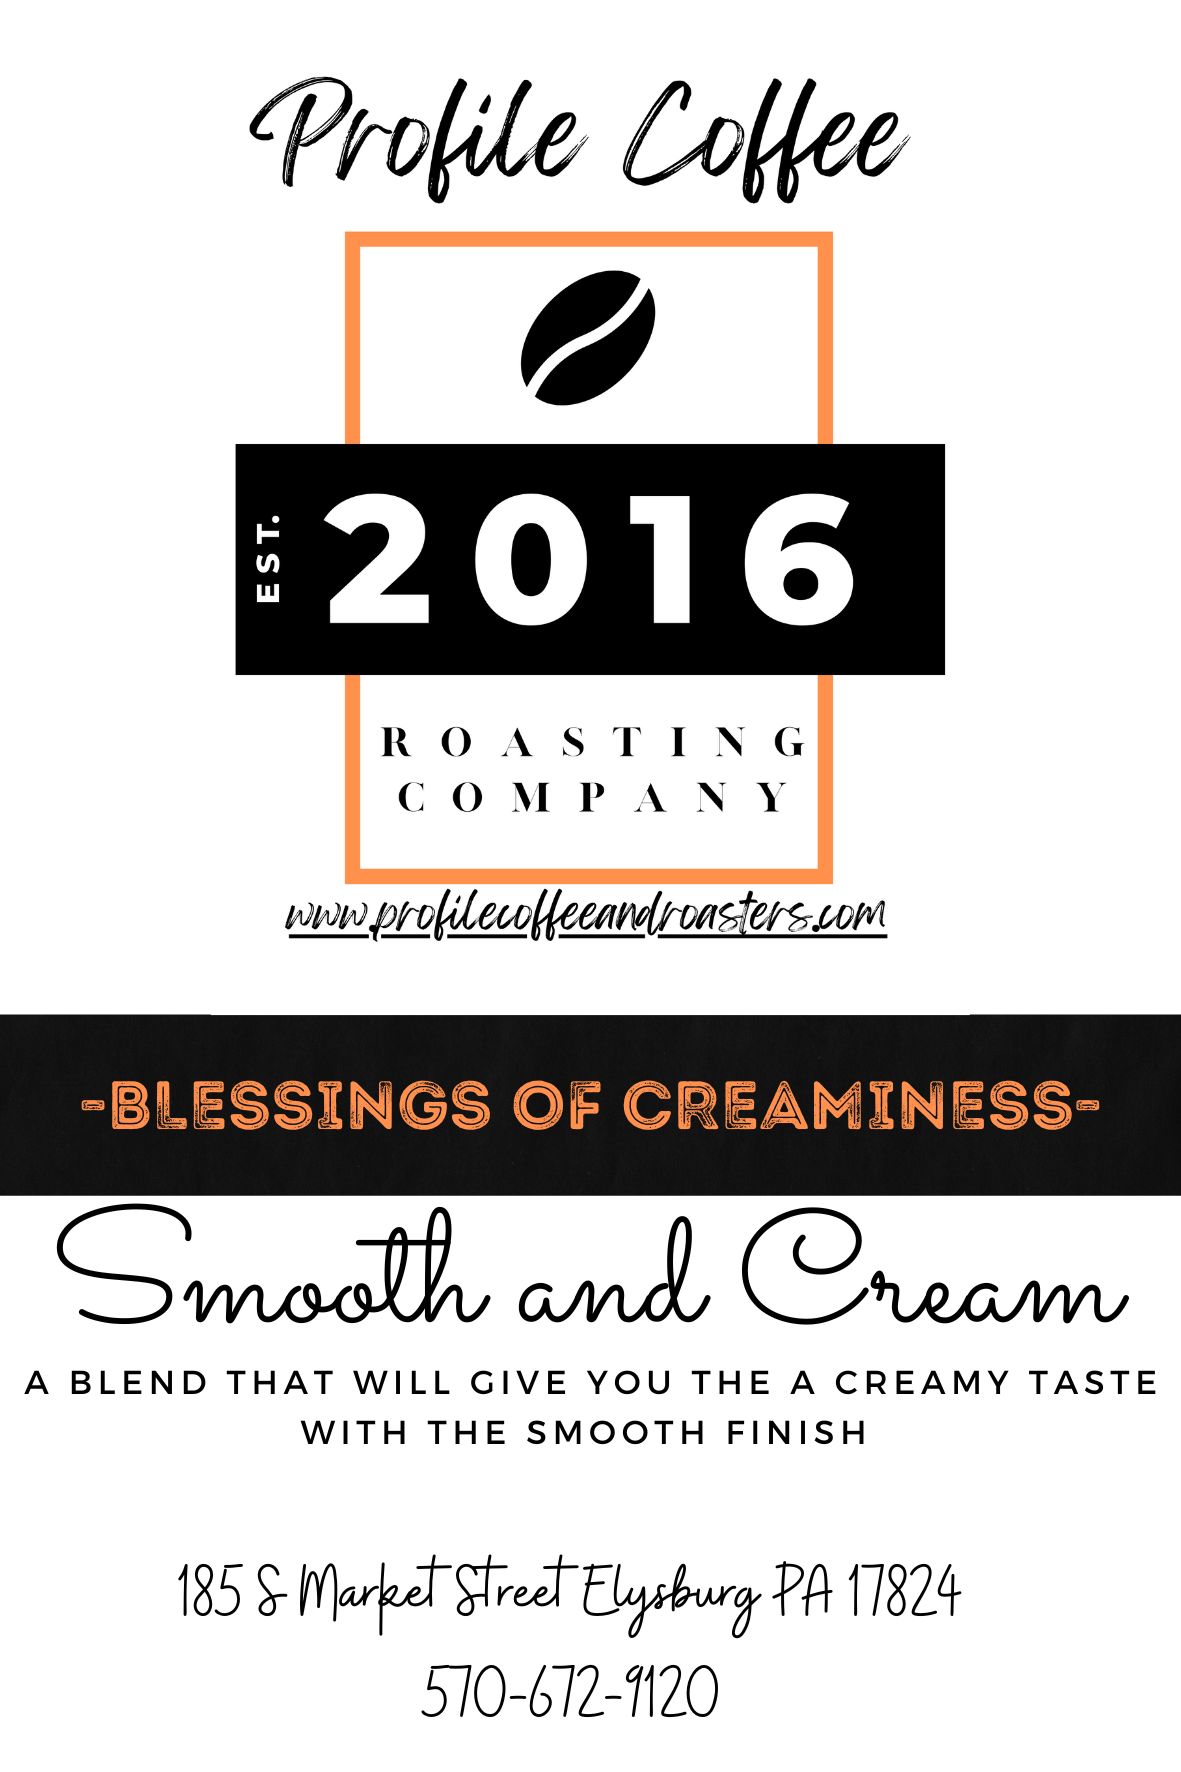 Fresh Roasted Blessings of Creaminess by Profile Whole Bean coffeebaglabels9-8-22_4x6in